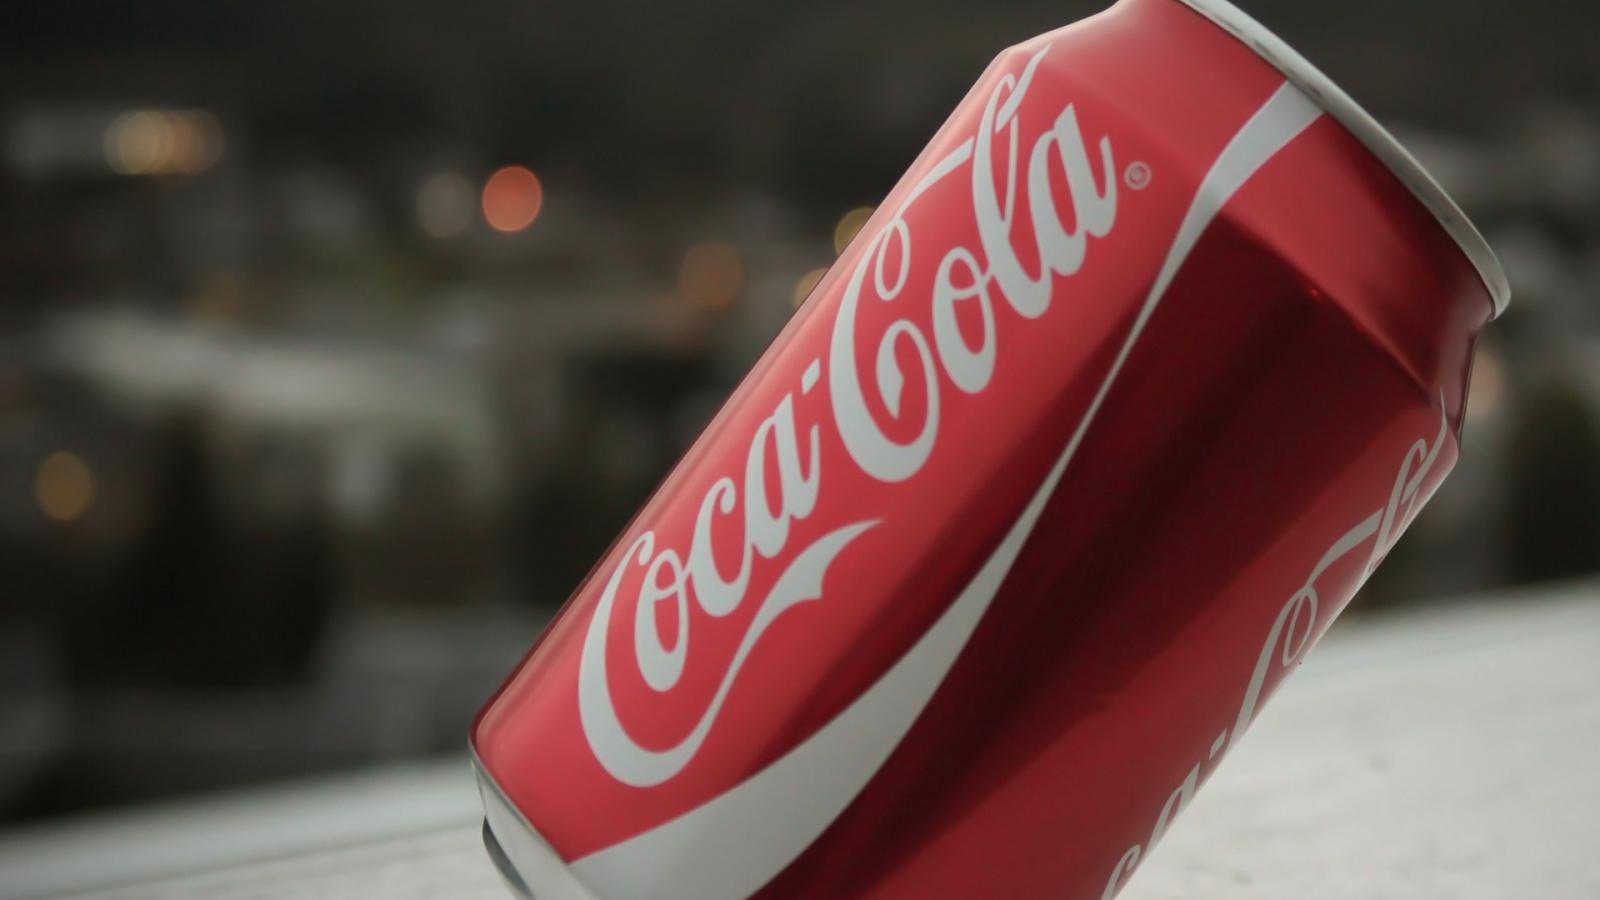 Coca Cola Life, Drink, Soft Drink, Coca, Carbonated Soft Drinks 16:9